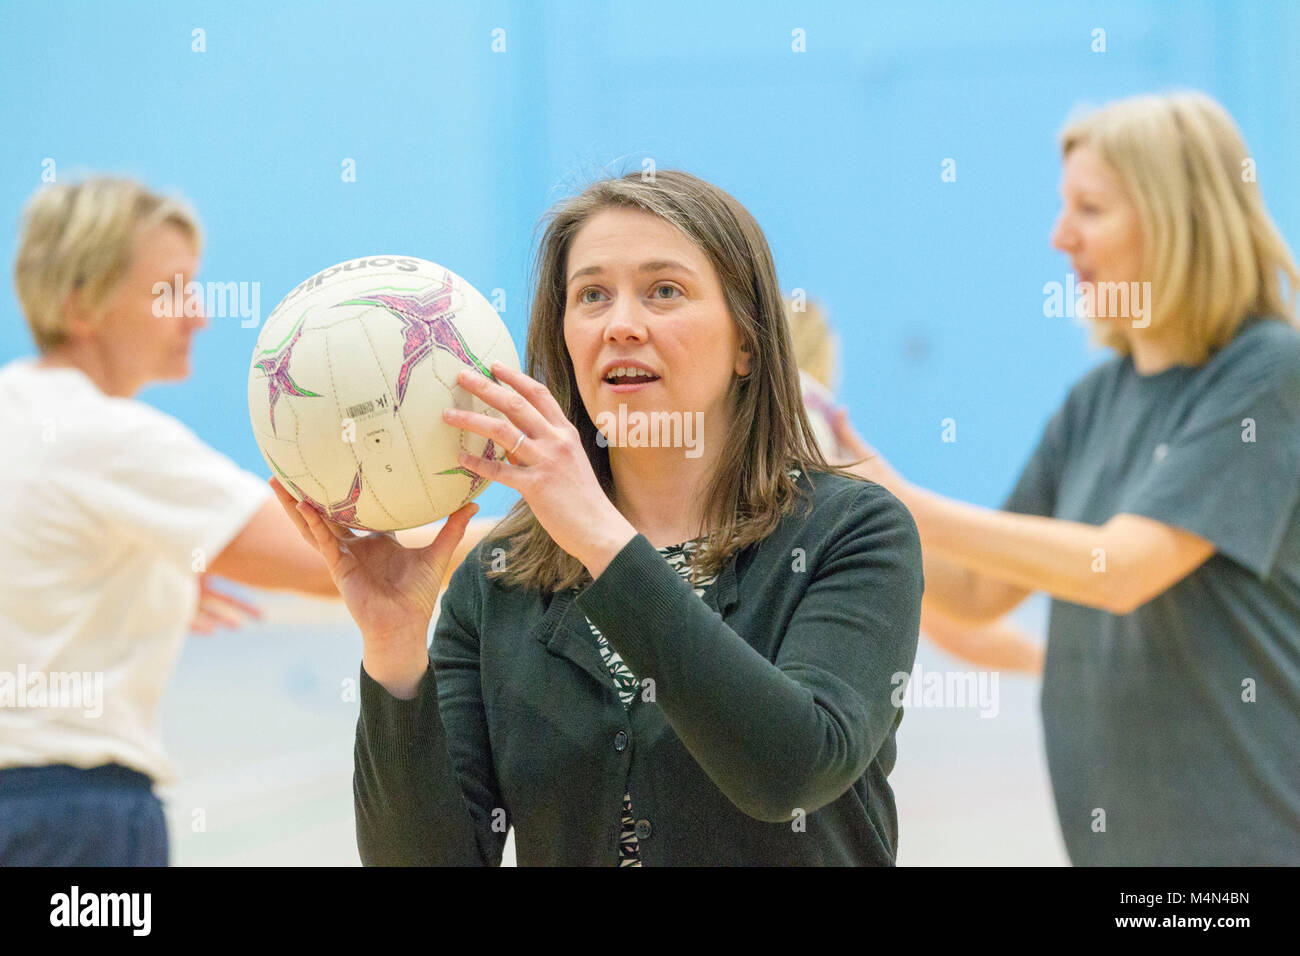 Sports and Public Health Minister Aileen Campbell playing walking netball Stock Photo